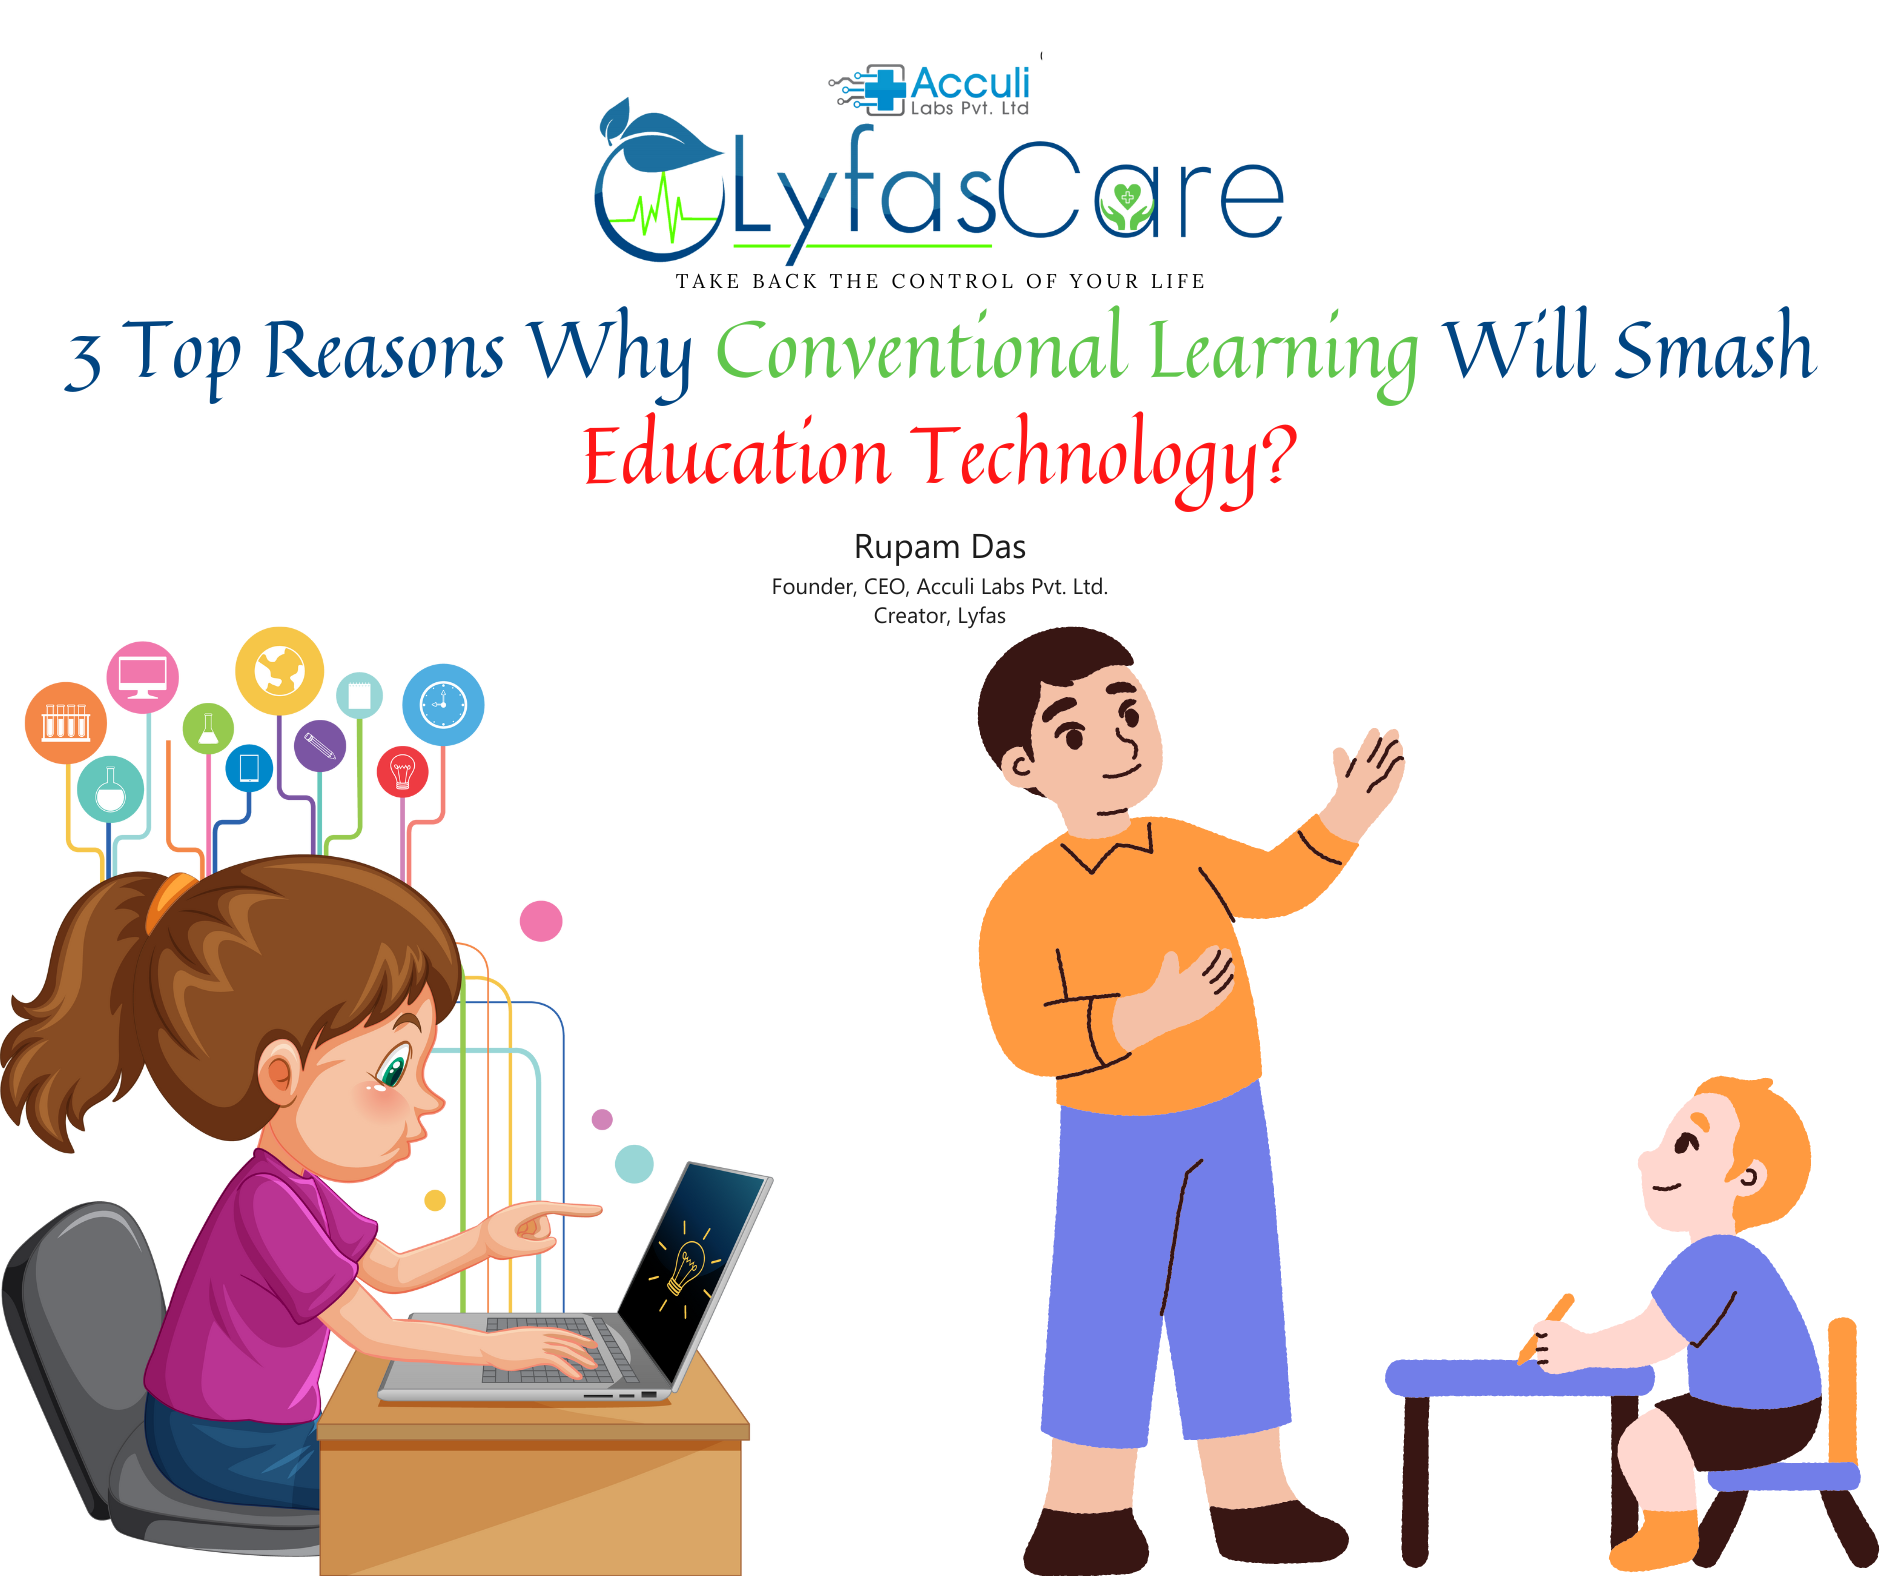 3 Top Reasons Why Conventional Learning Will Smash Education Technology